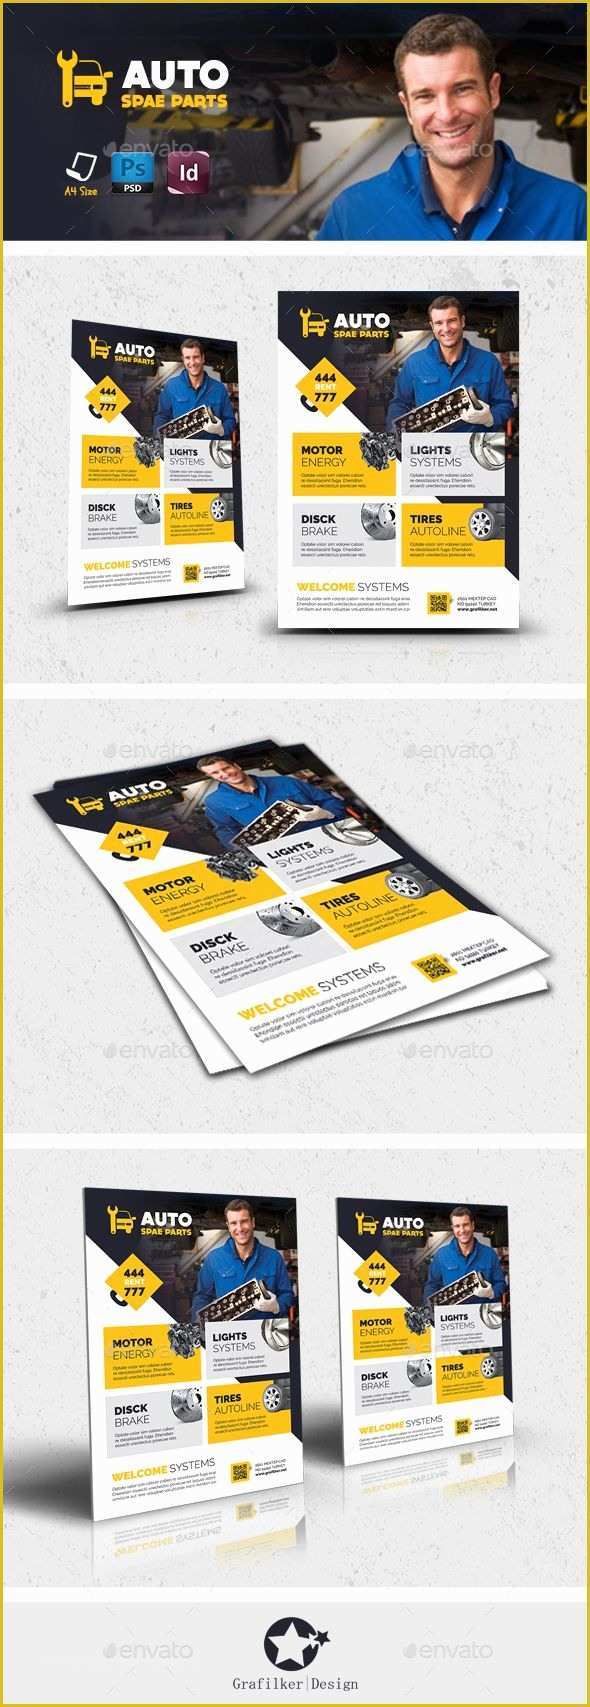 Auto Spare Parts Website Template Free Download Of Auto Spare Part Flyer Templates Psd Design Download